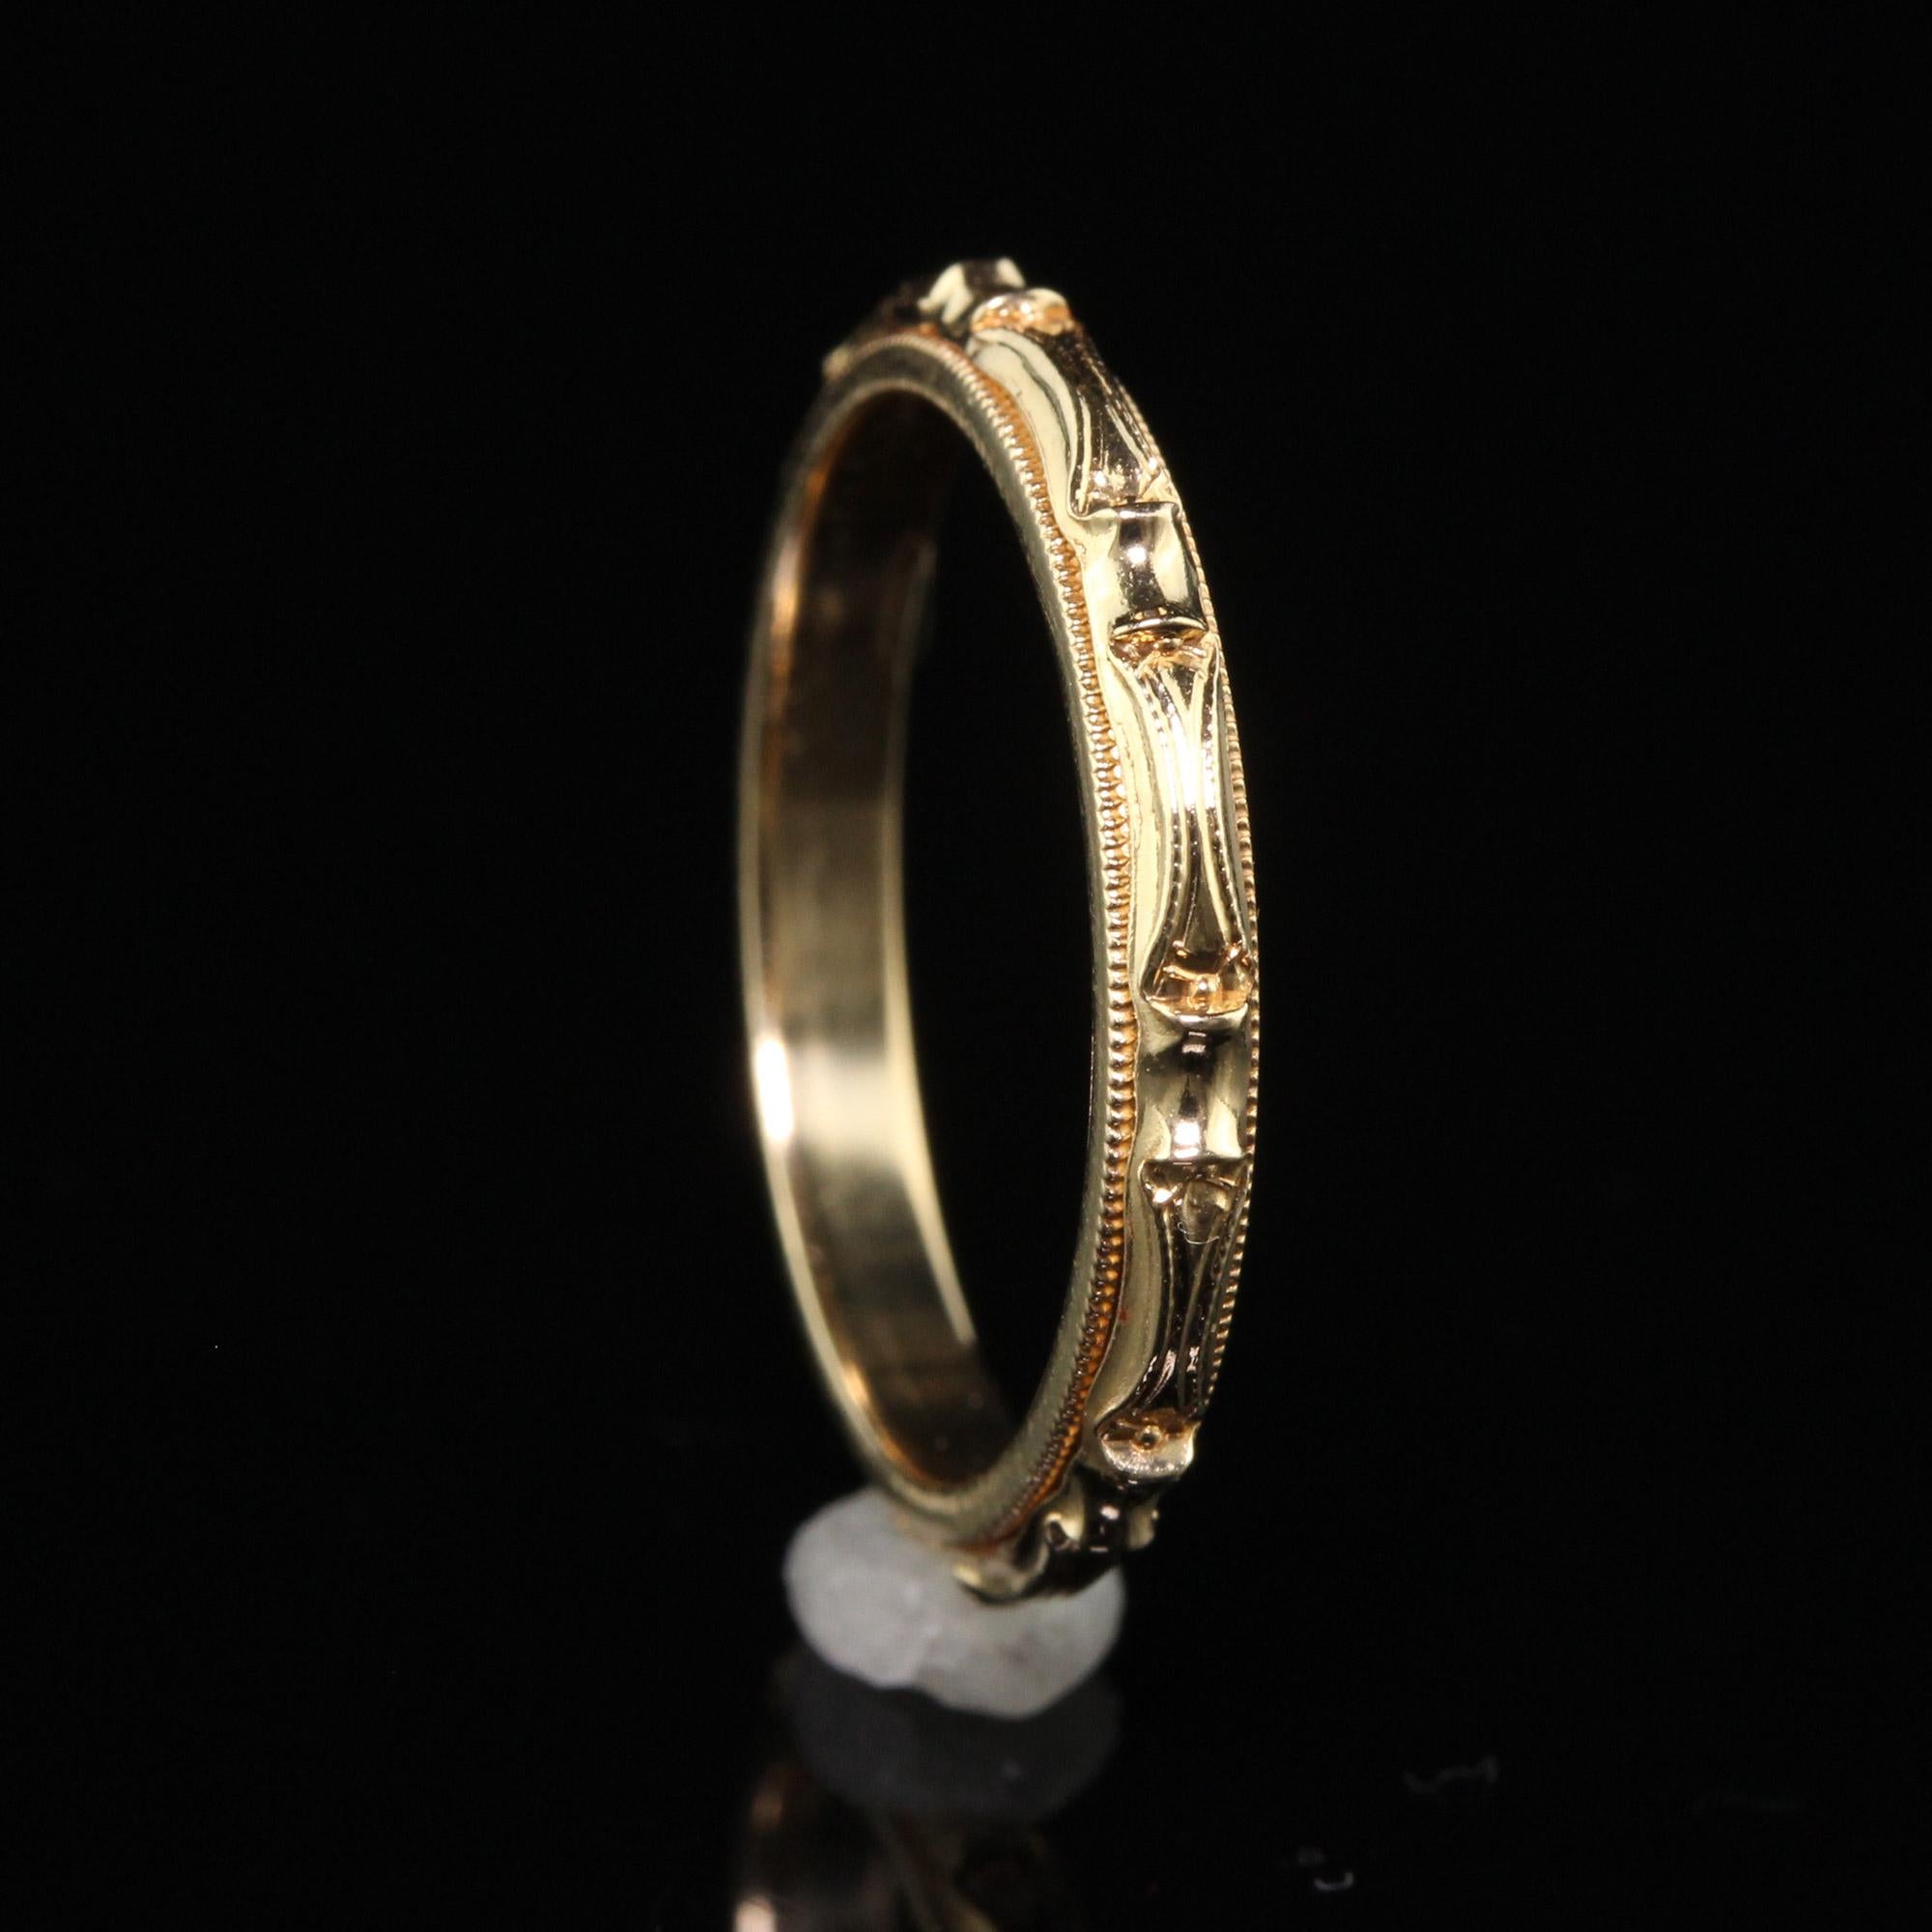 Antique Art Deco Art Carved 14K Yellow Gold Engraved Wedding Band - Size 5 For Sale 2